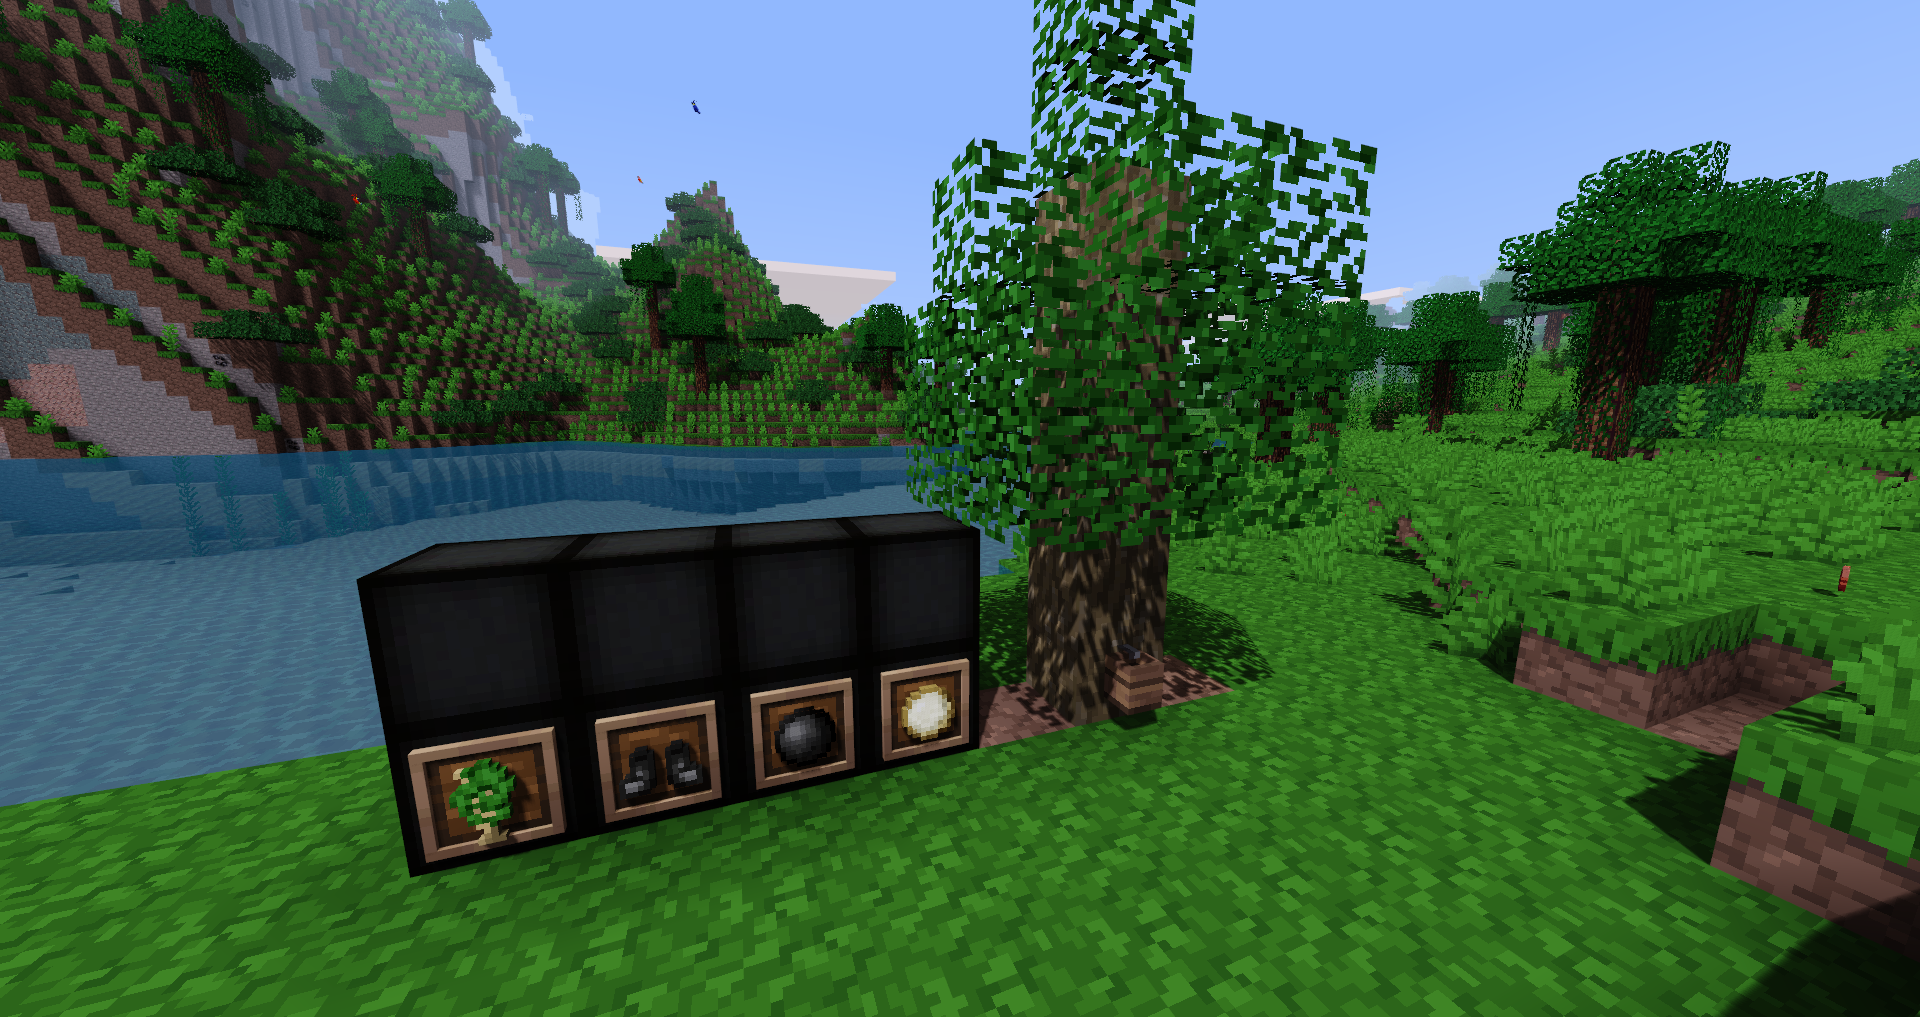 Some Items and the Treetap